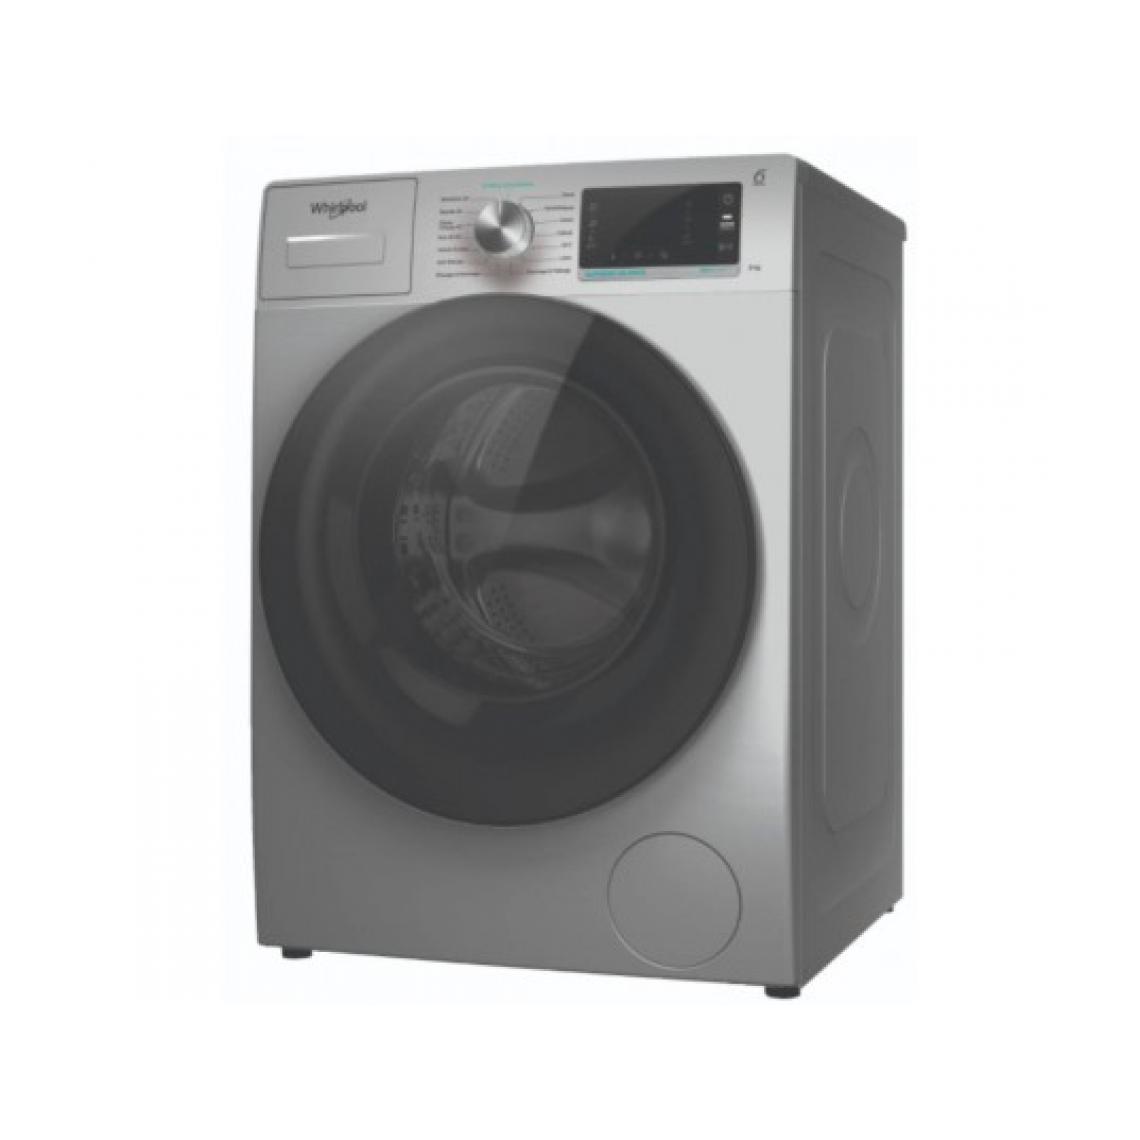 whirlpool - Lave linge Frontal W6W945SBFR - Lave-linge